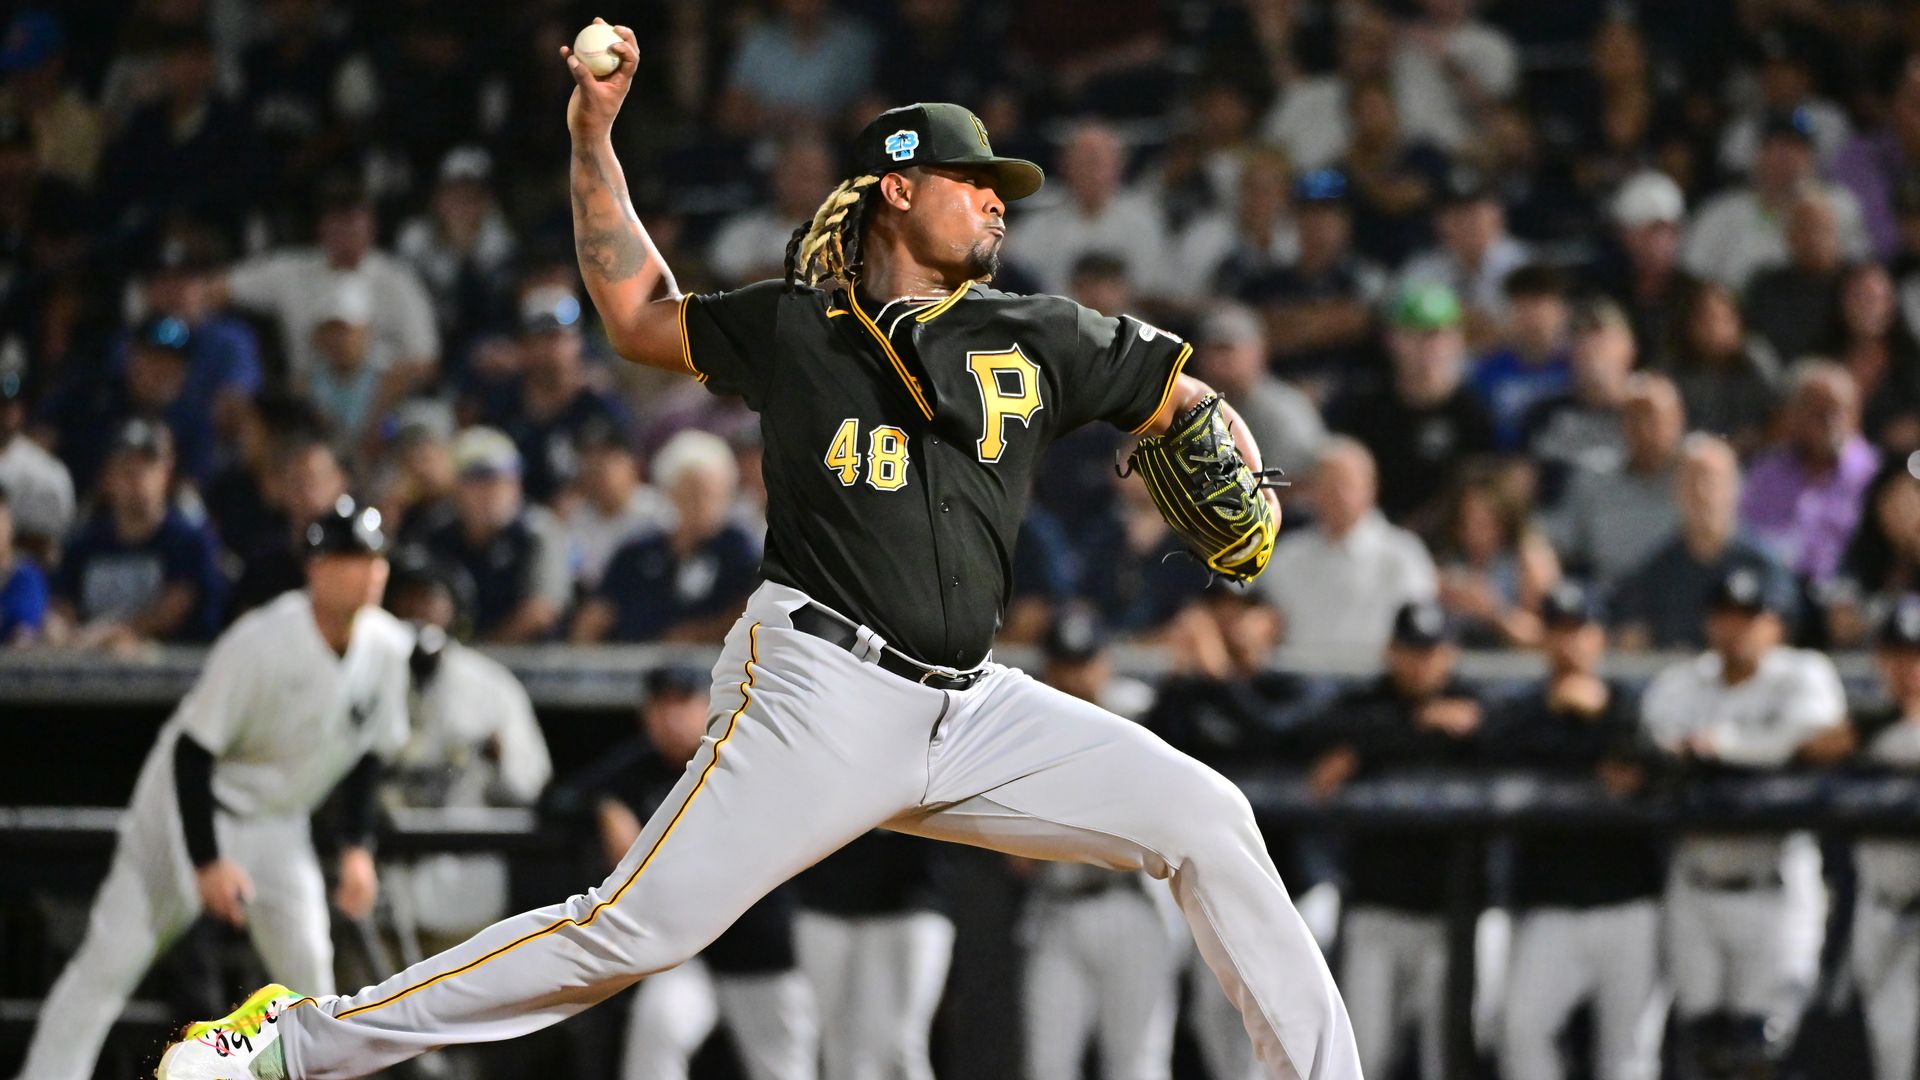 A photo of Luis Ortiz throwing a pitch for the Pittsburgh Pirates during a March spring training game in Tampa, Florida.